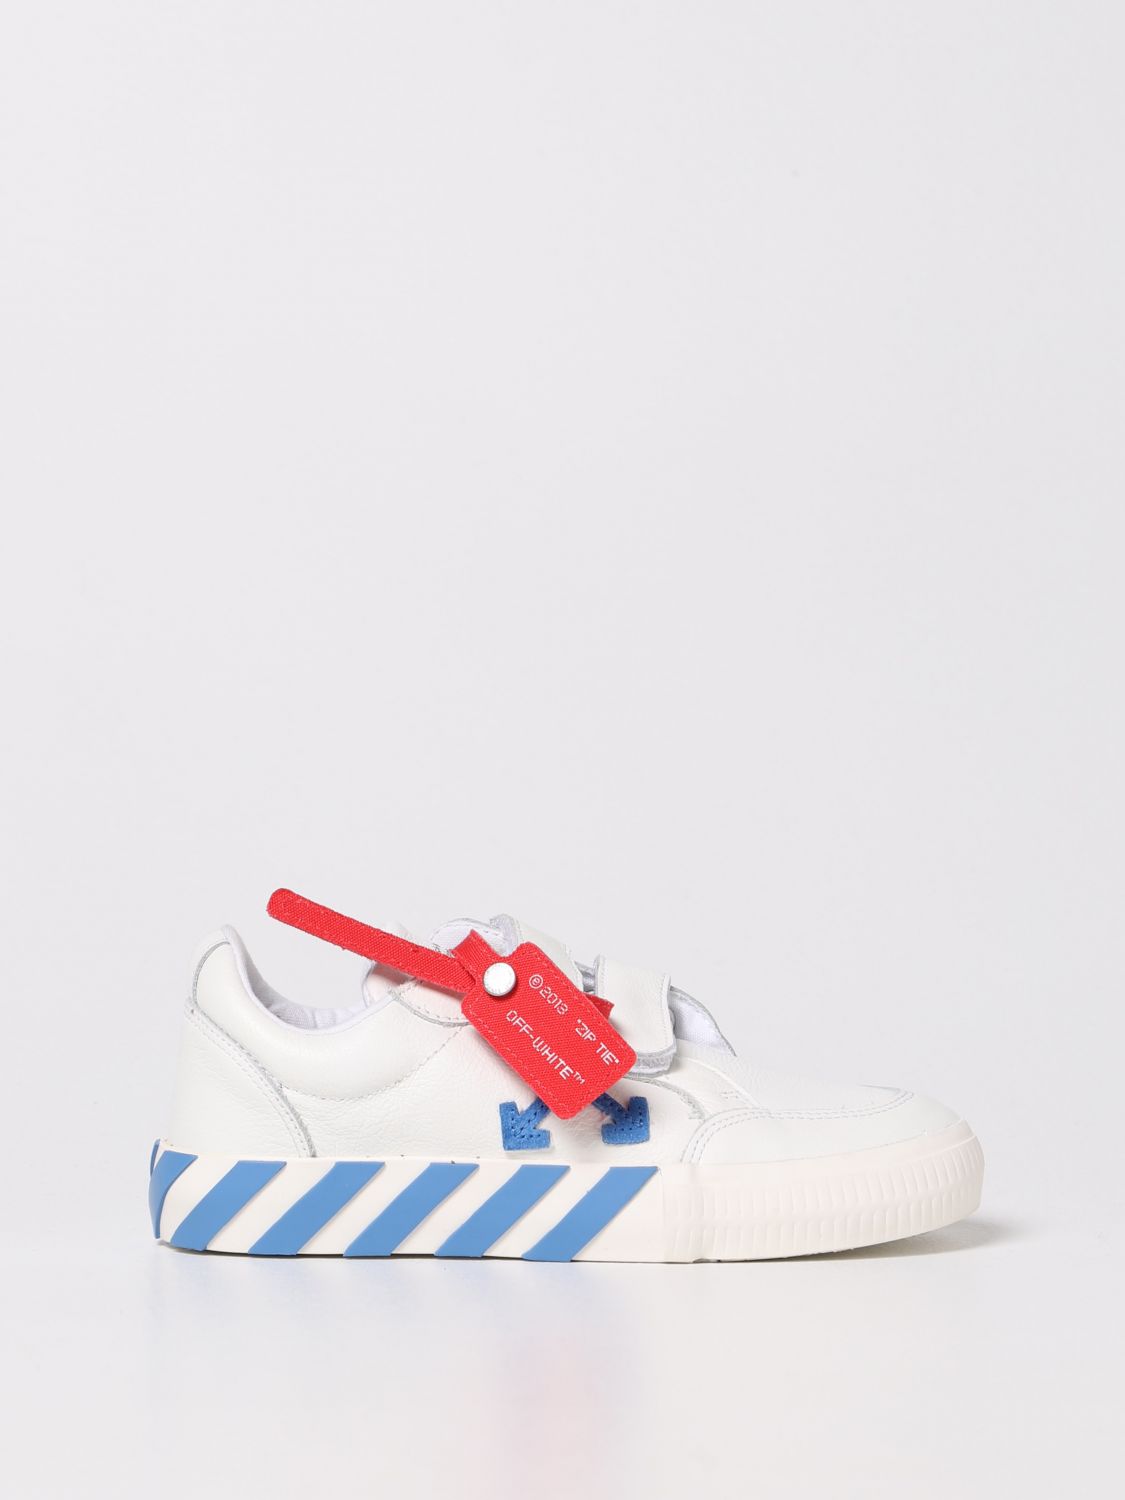 OFF-WHITE LOW VULCANIZED OFF-WHITE SNEAKERS IN LEATHER,359366001